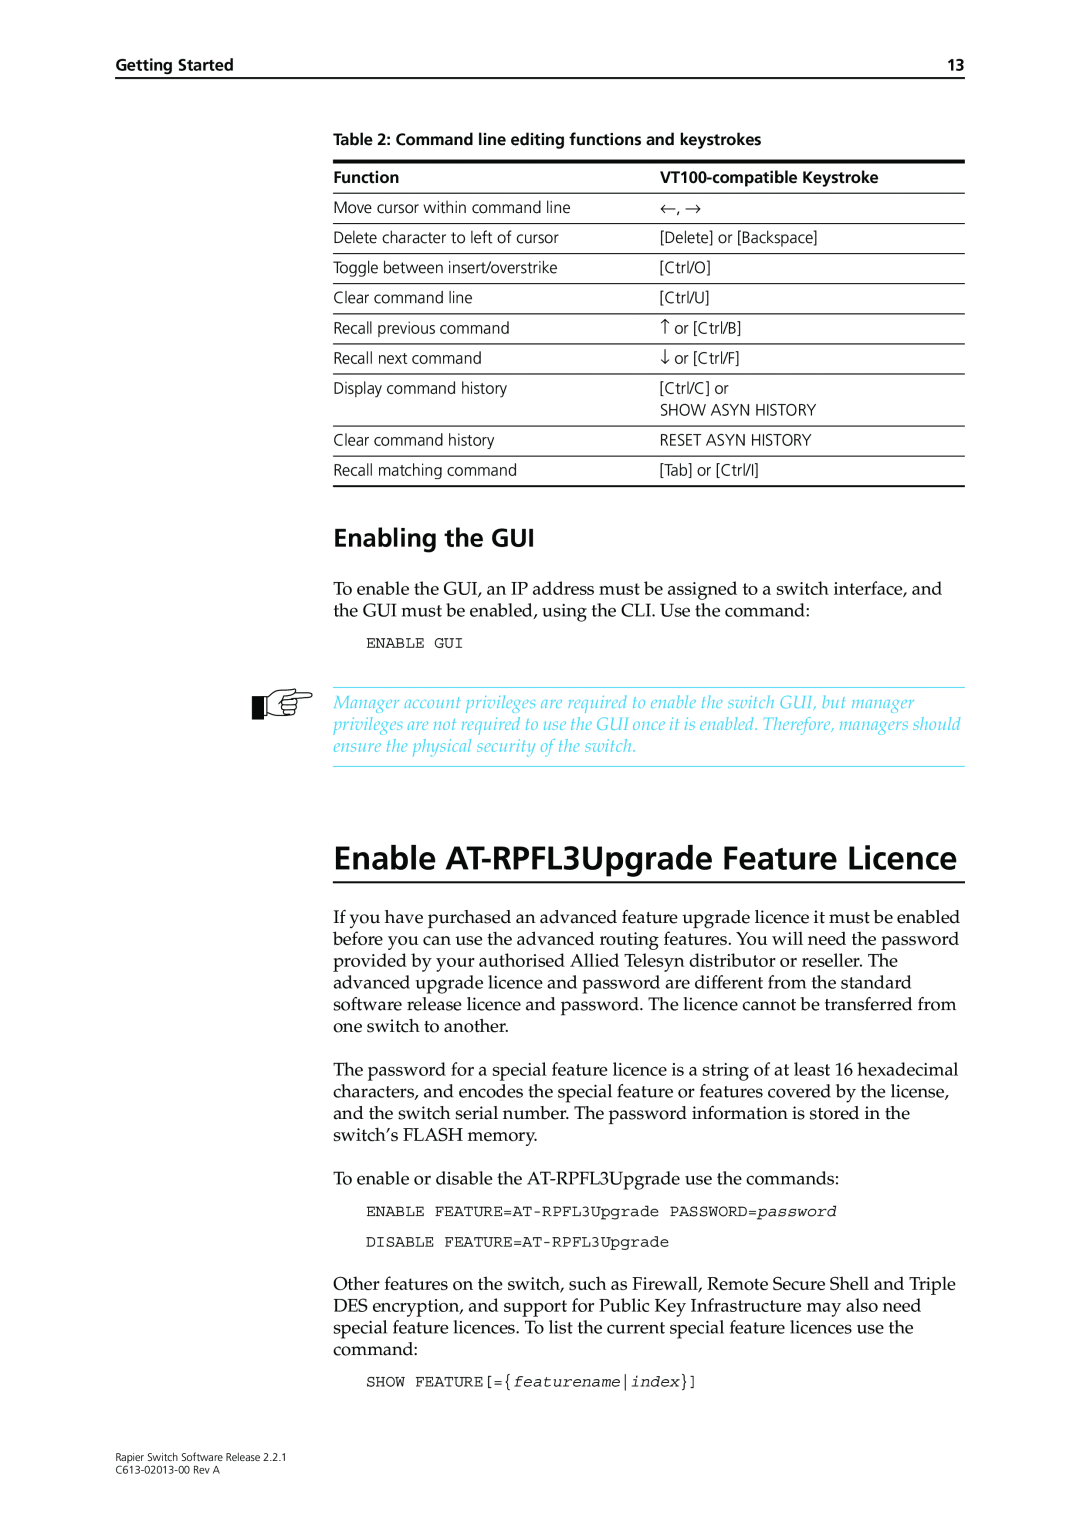 Allied Telesis C613-02013-00 manual Enable AT-RPFL3Upgrade Feature Licence, Enabling the GUI 